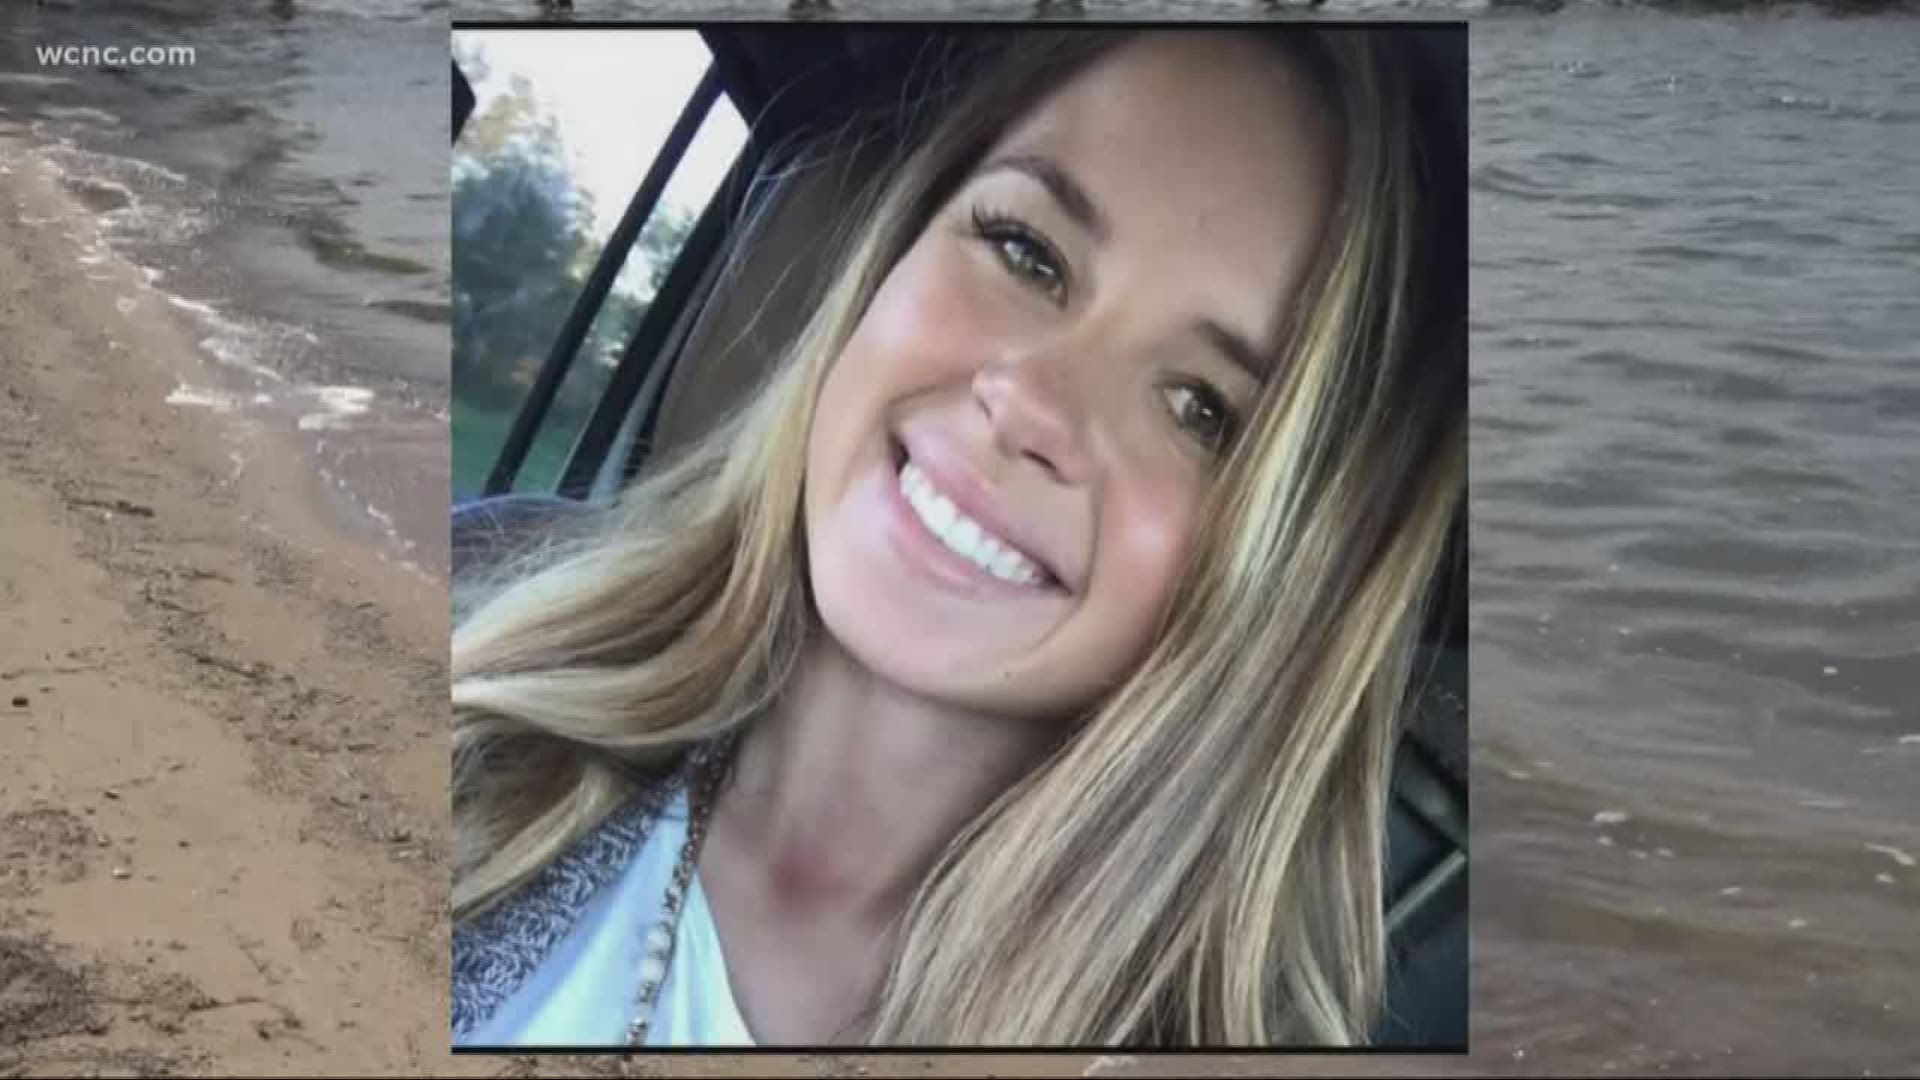 Her family said she grew up on the lake and knew how to swim. She didn't have any known medical conditions and with a fitness competition right around the corner, her family says she wouldn't be drinking excessively.